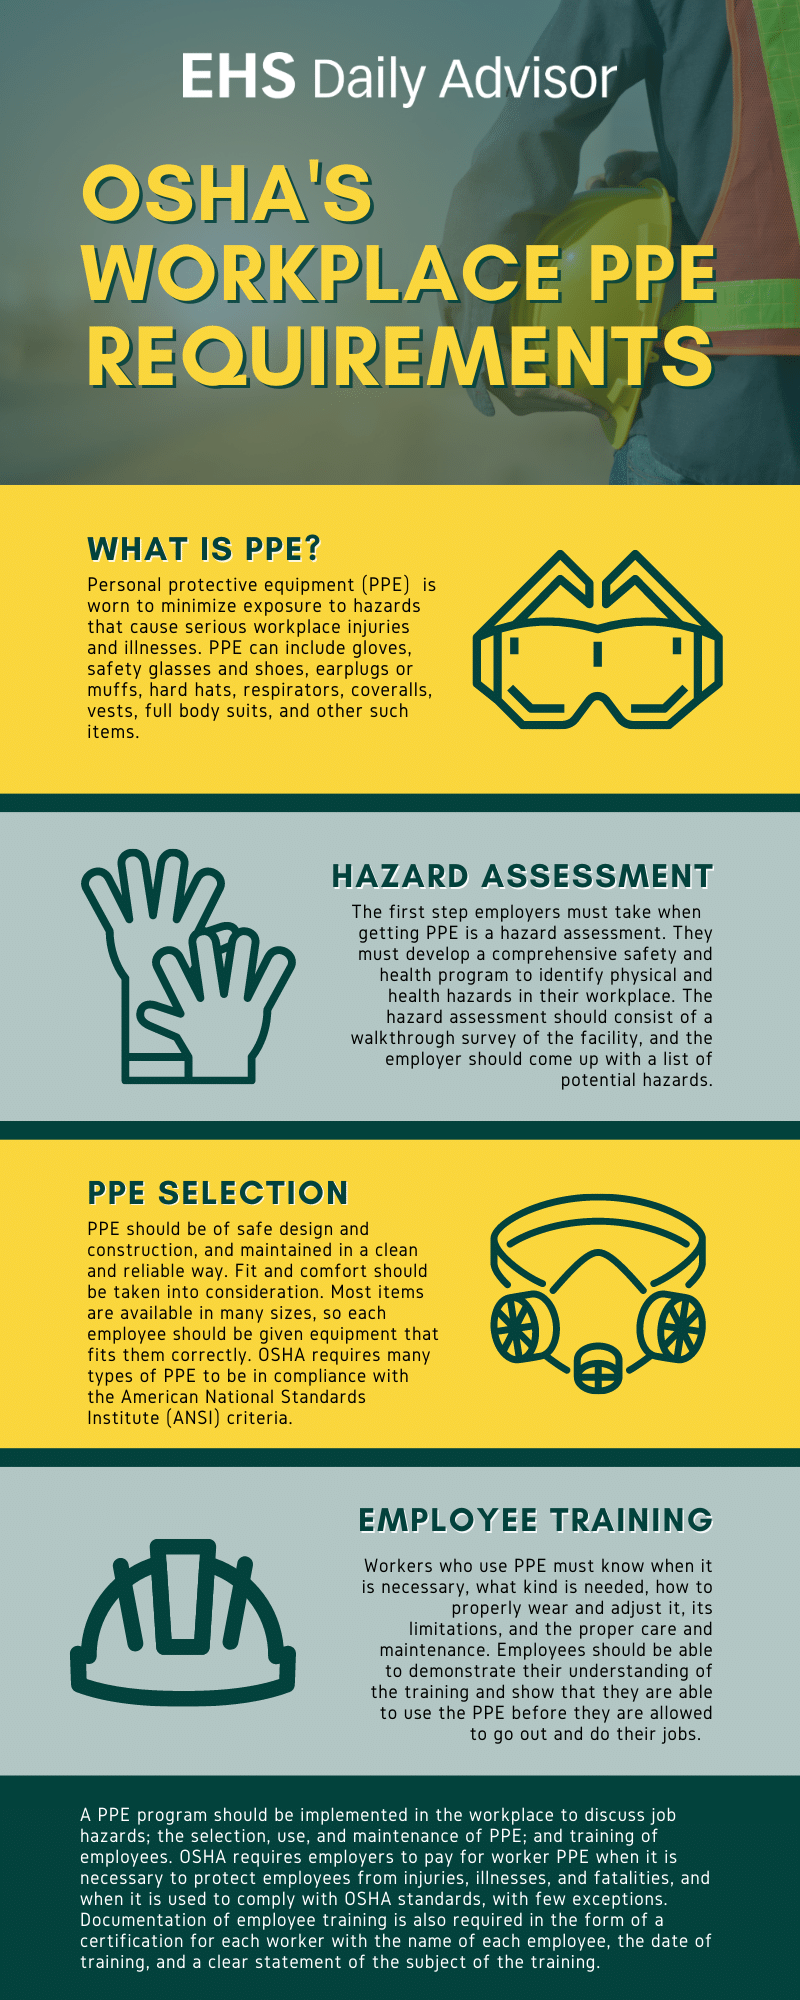 Infographic OSHA's Workplace PPE Requirements EHS Daily Advisor